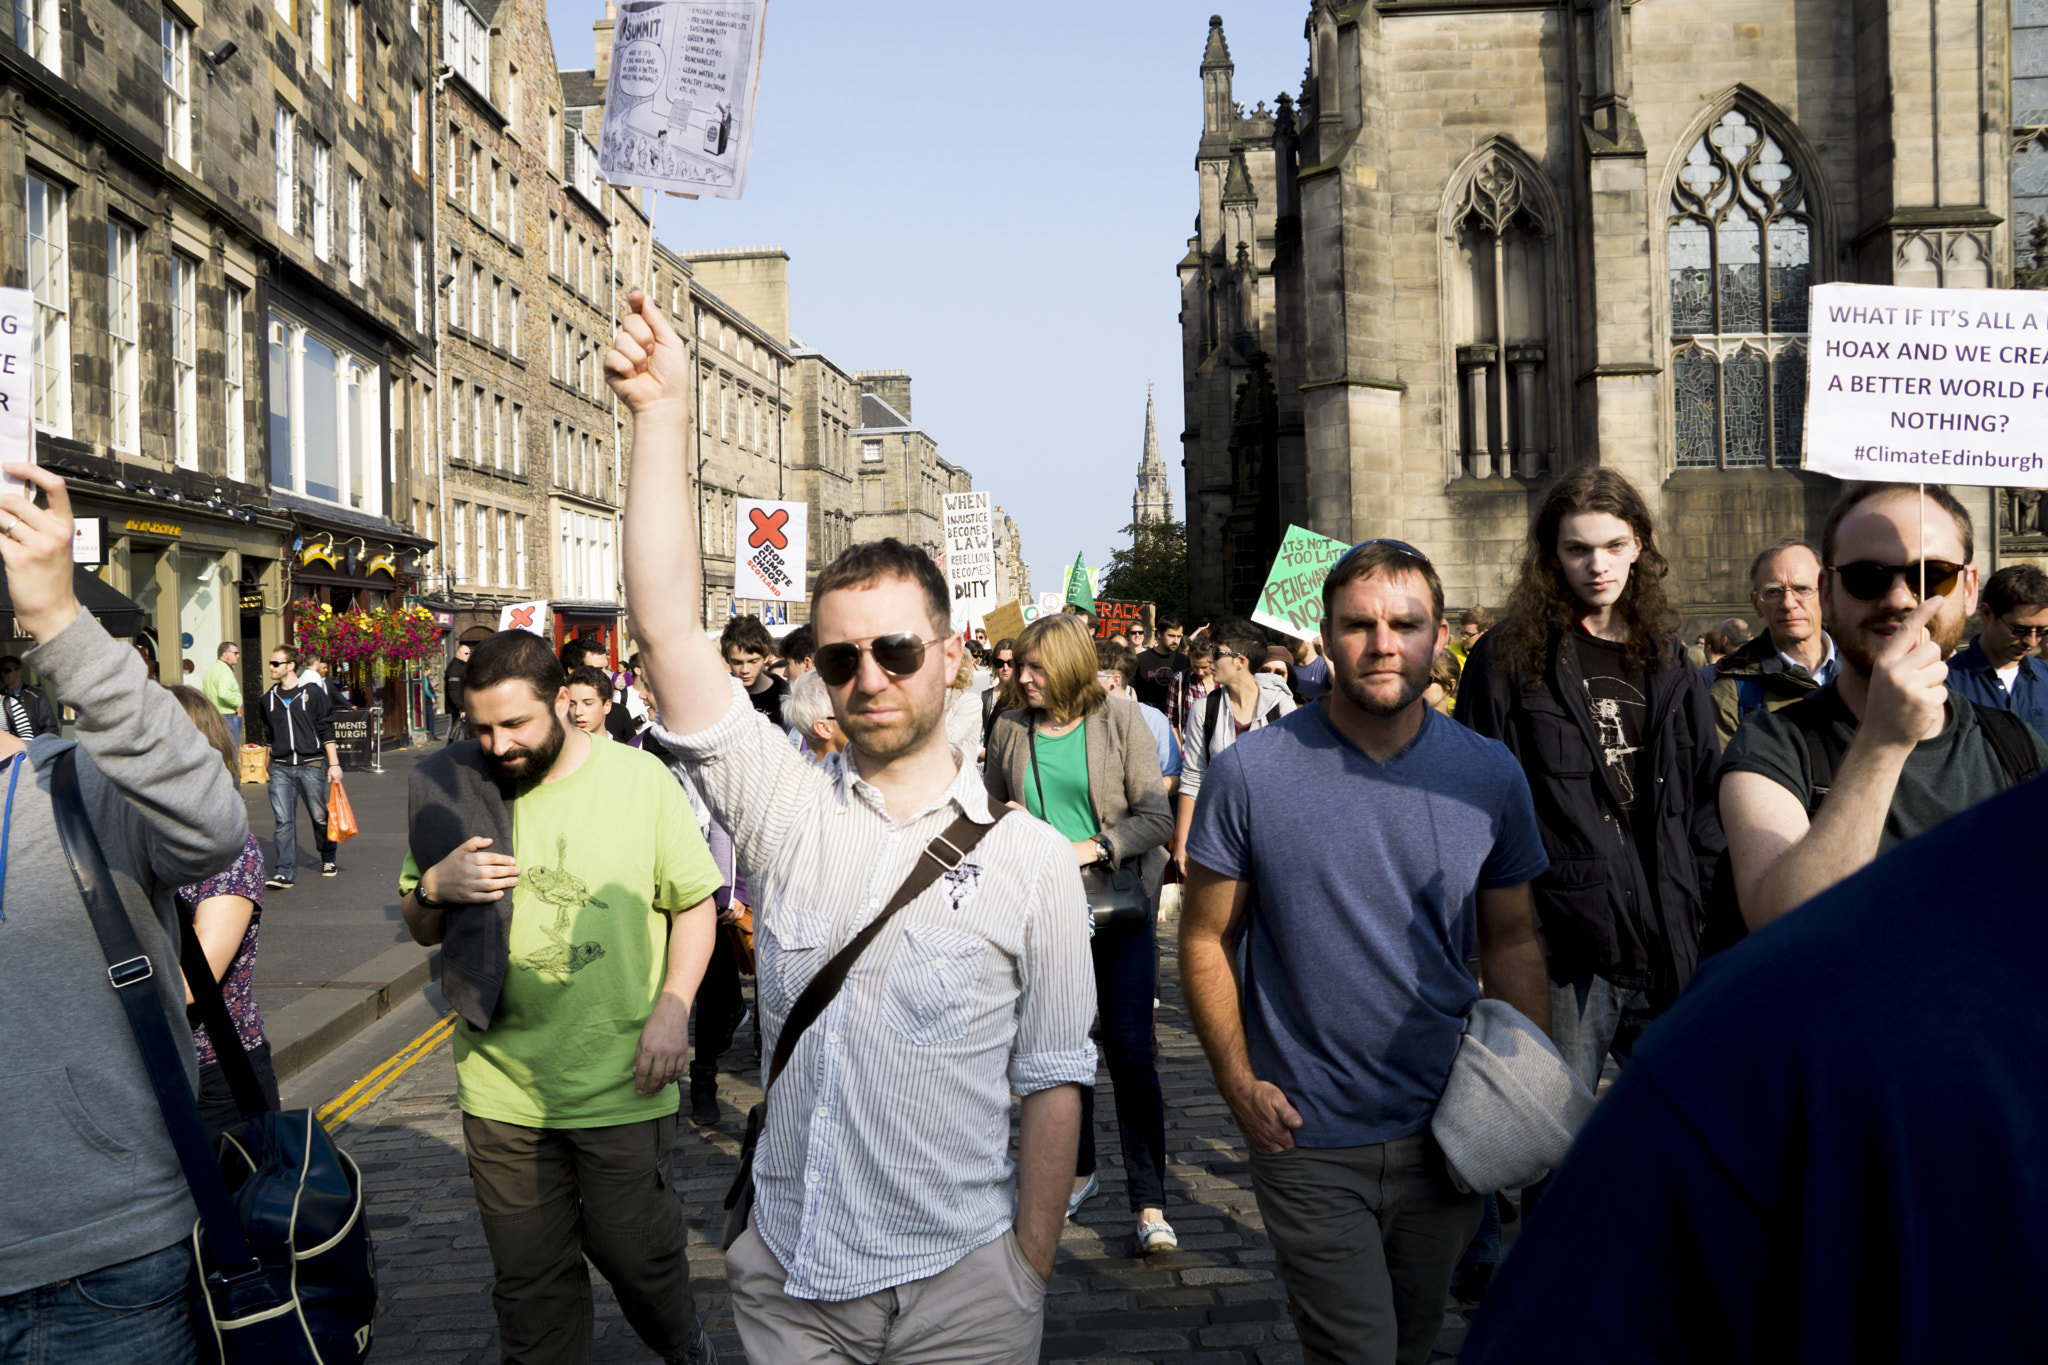 Sony a6000 sample photo. Edinburgh's people climate march photography